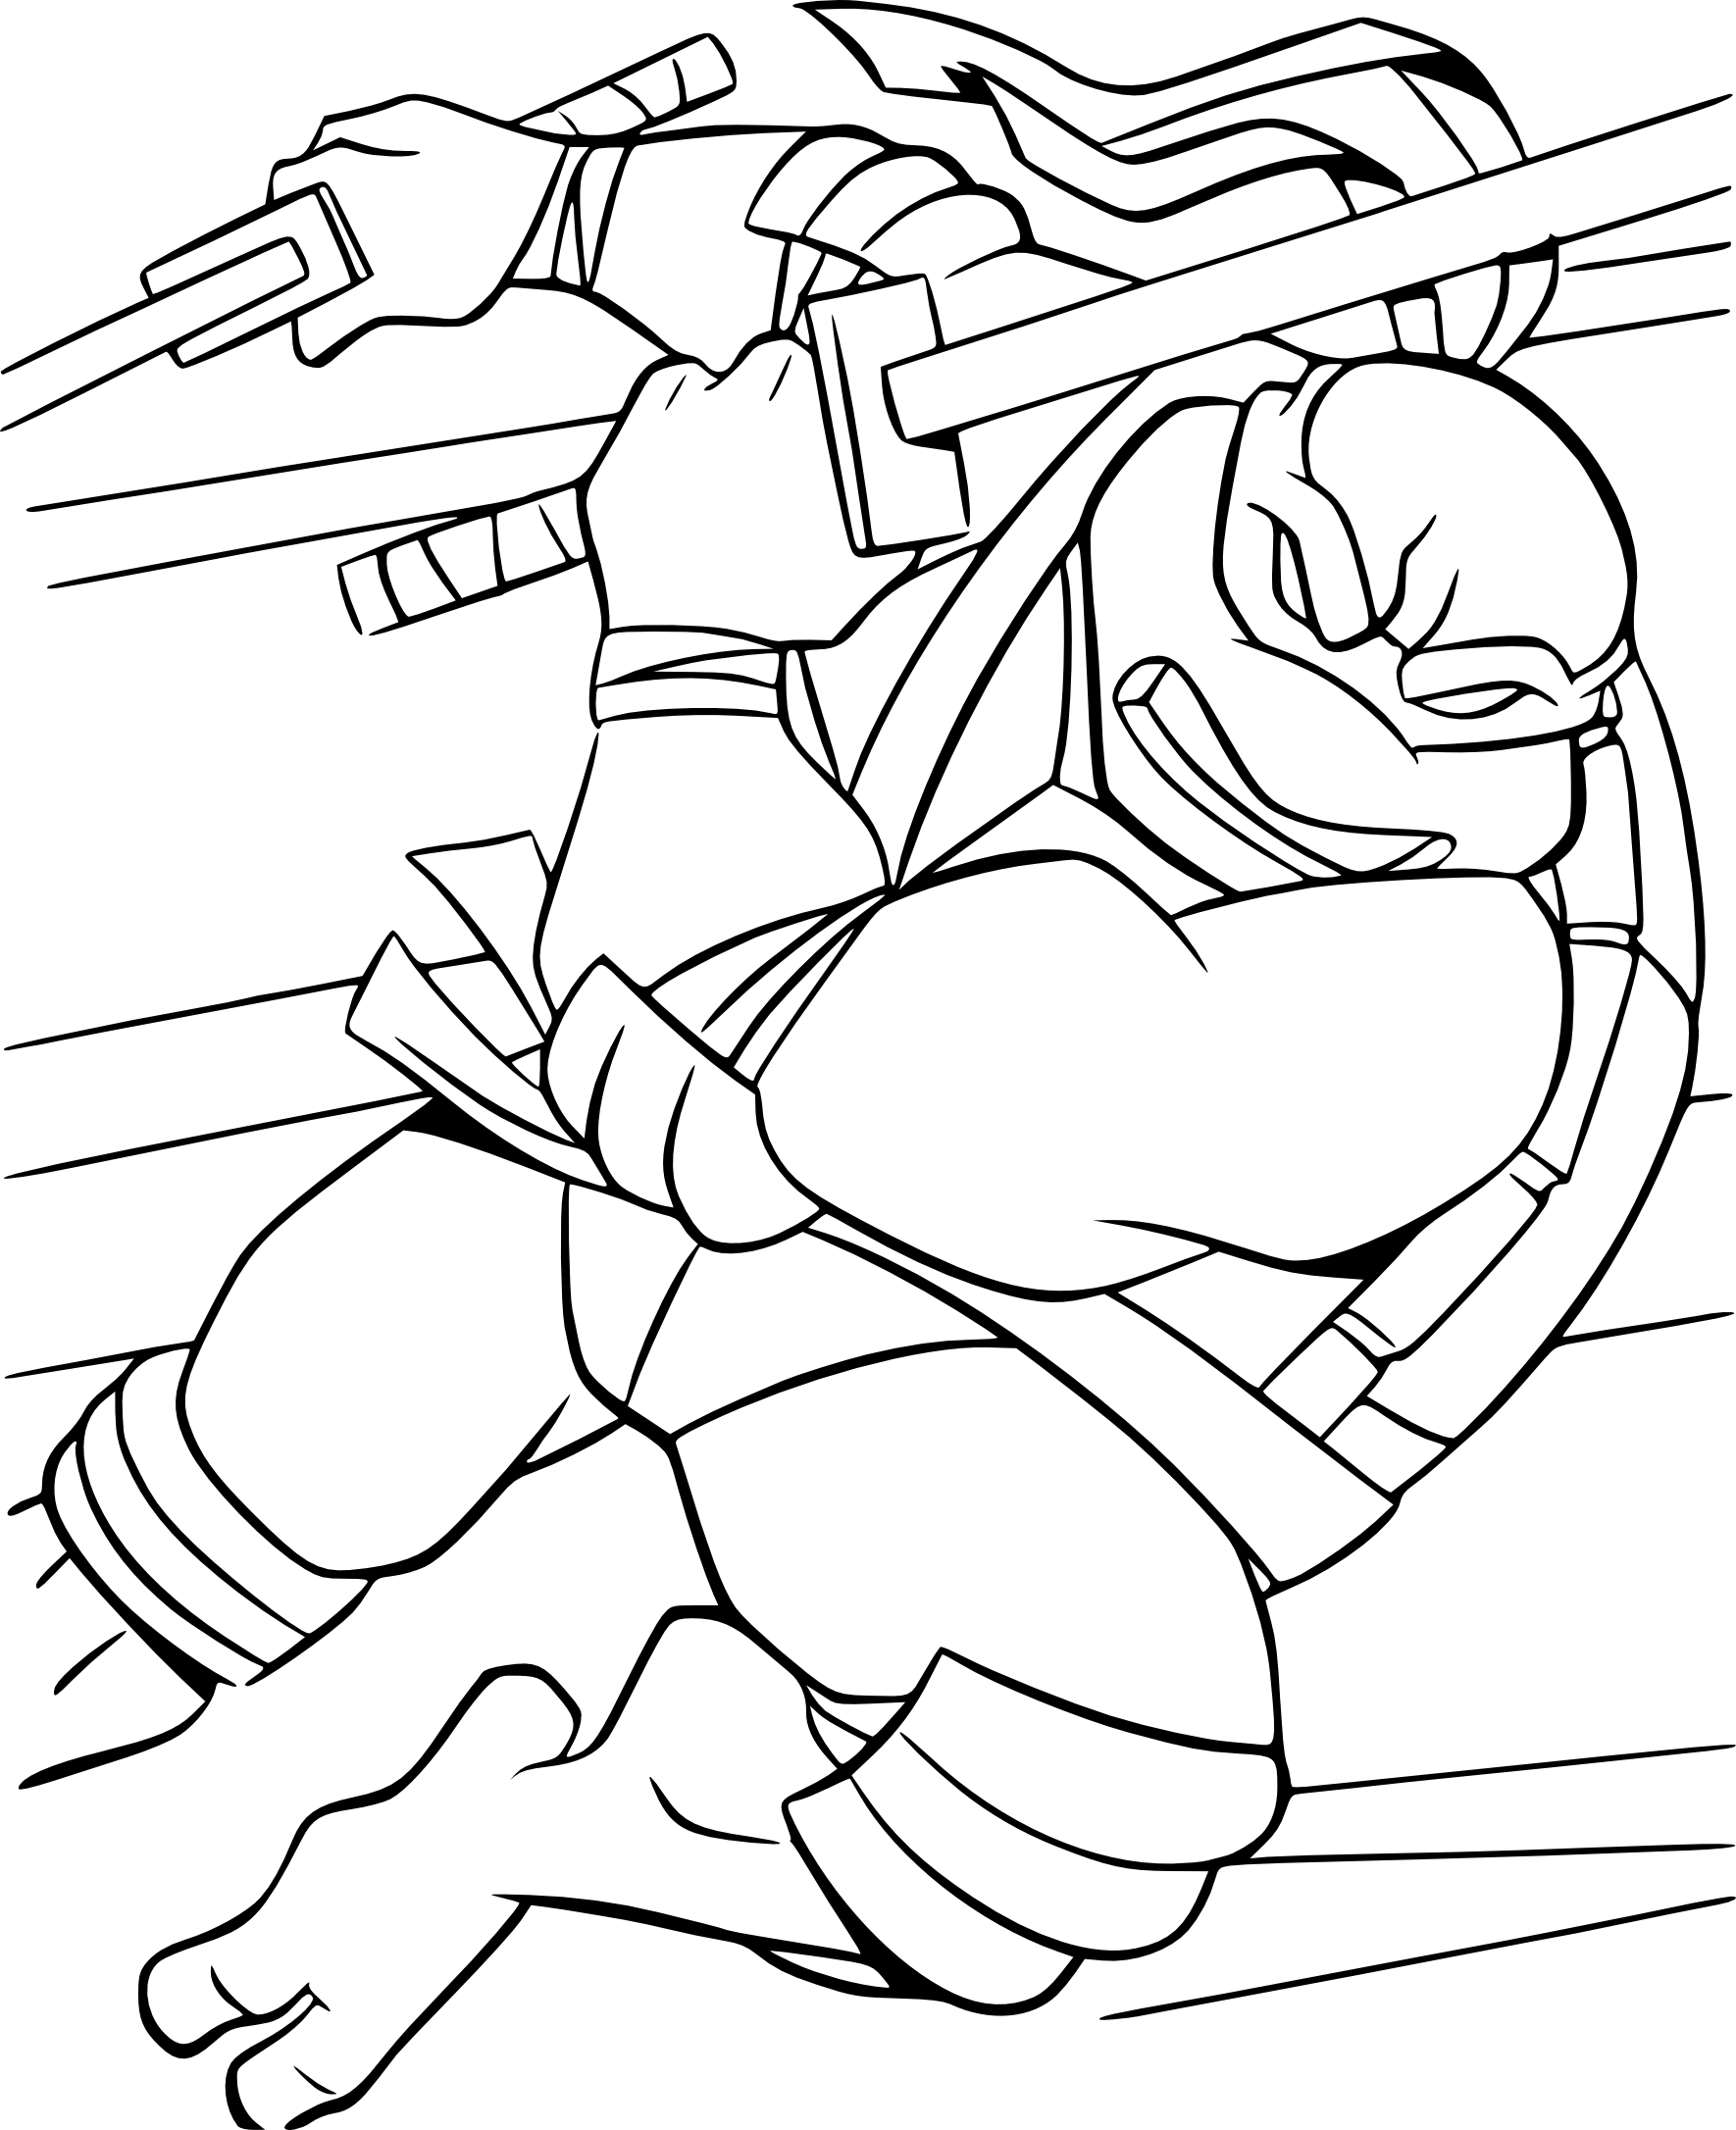 Ninja Turtle In Combat coloring page